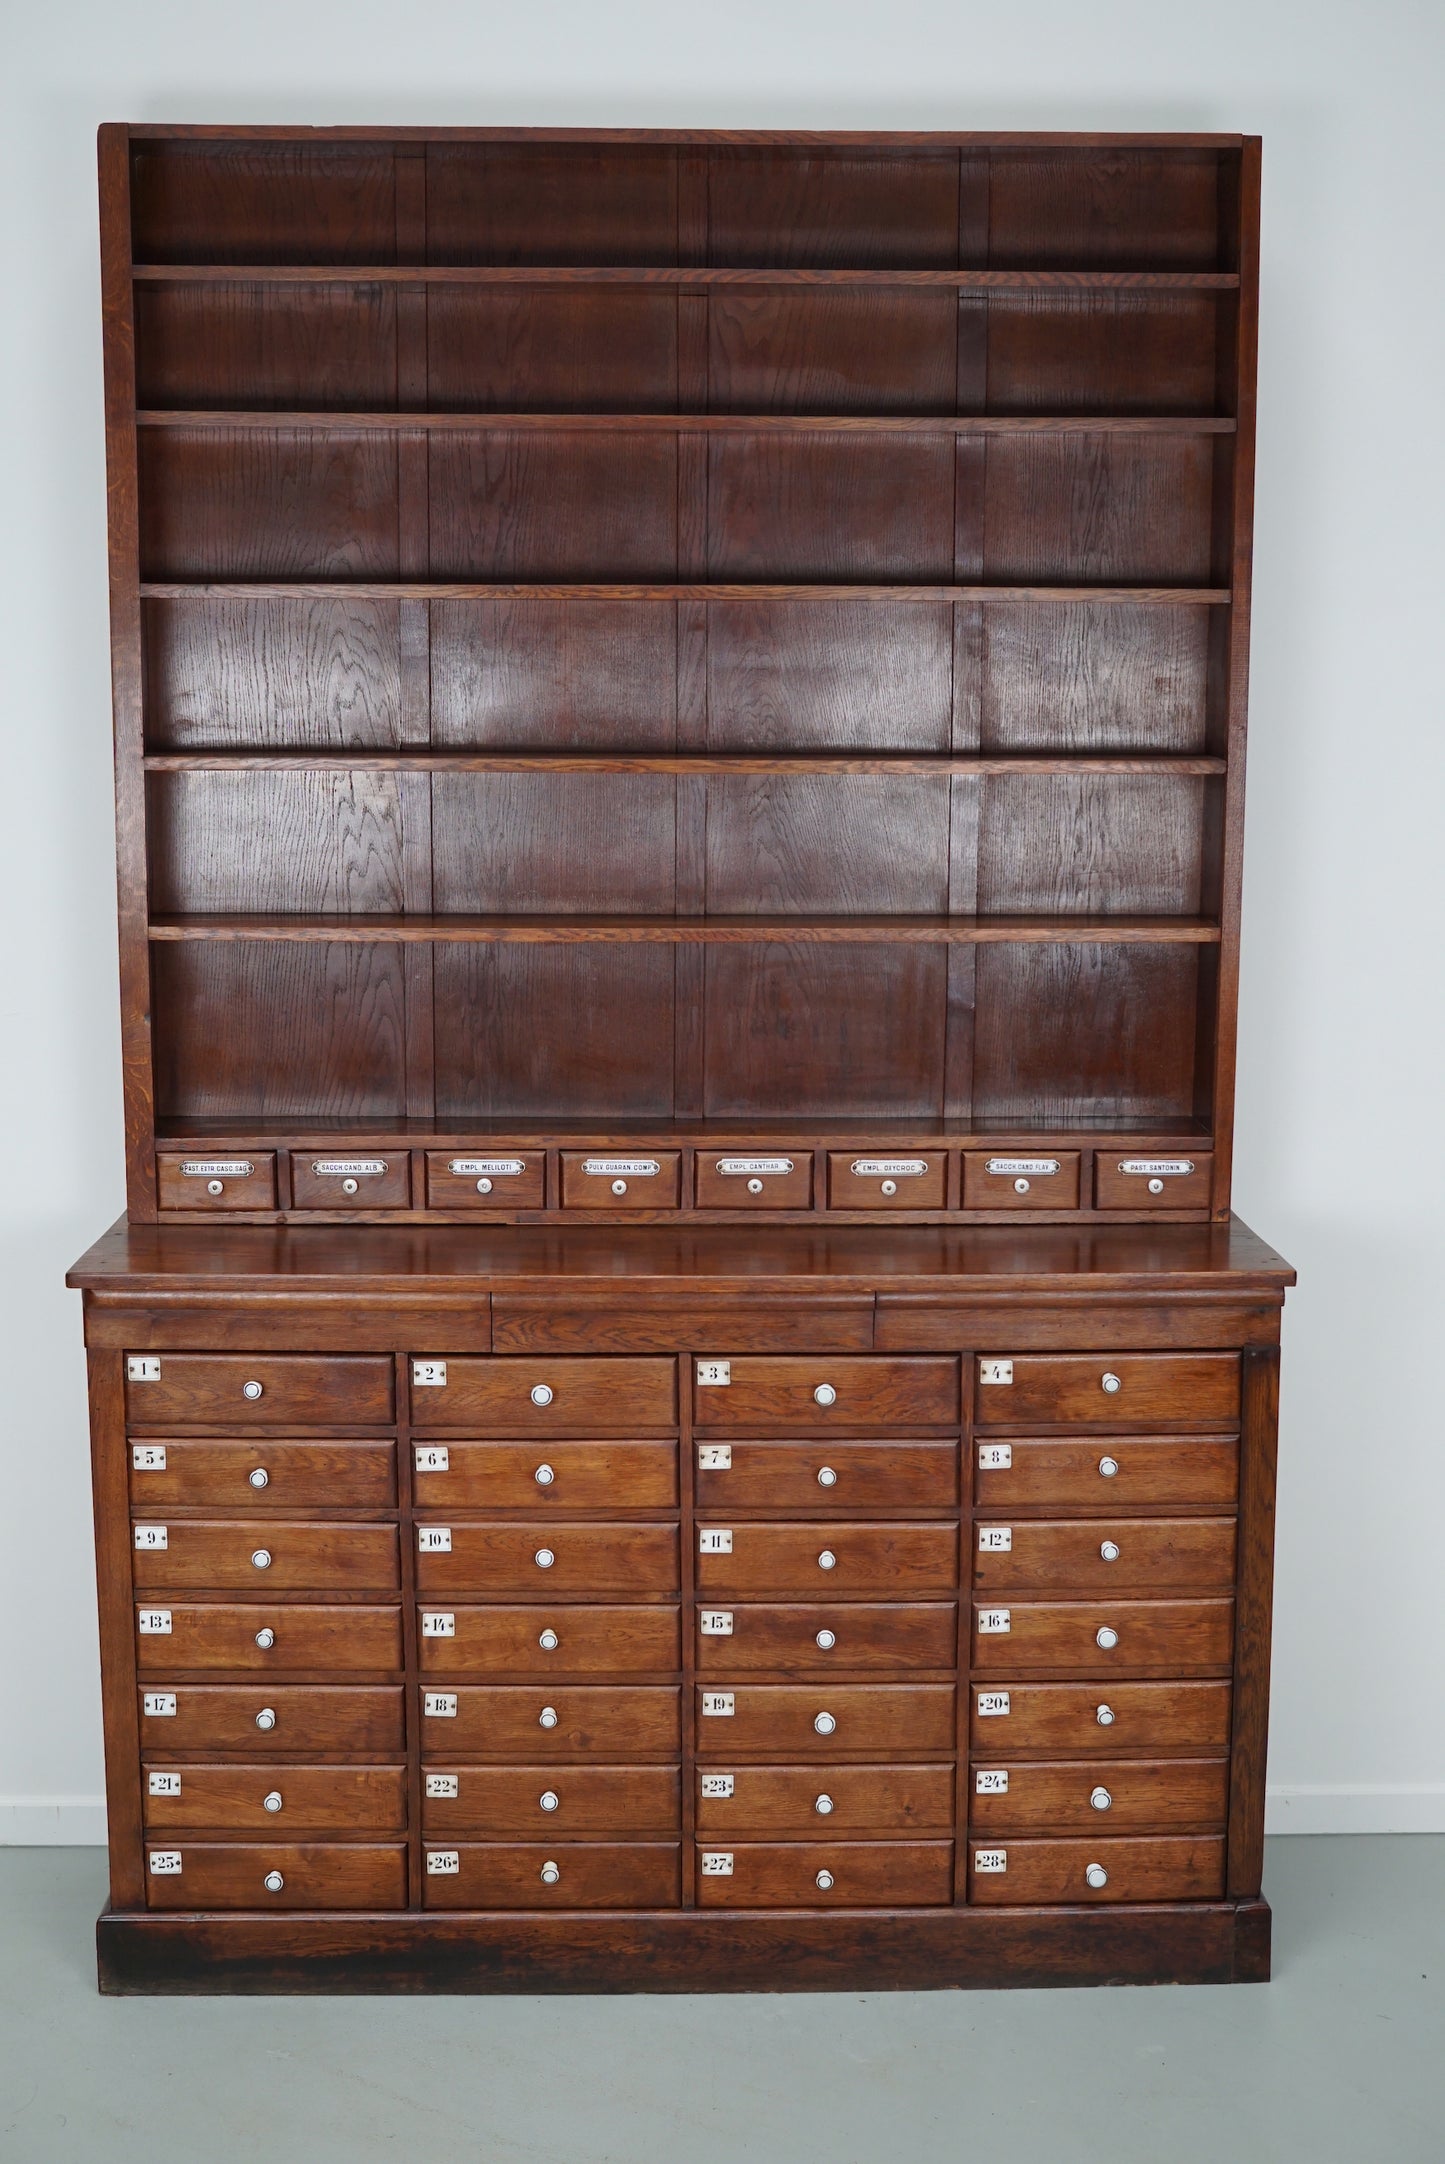 Large German Oak Apothecary Cabinet with Enamel Shields, Late 19th Century